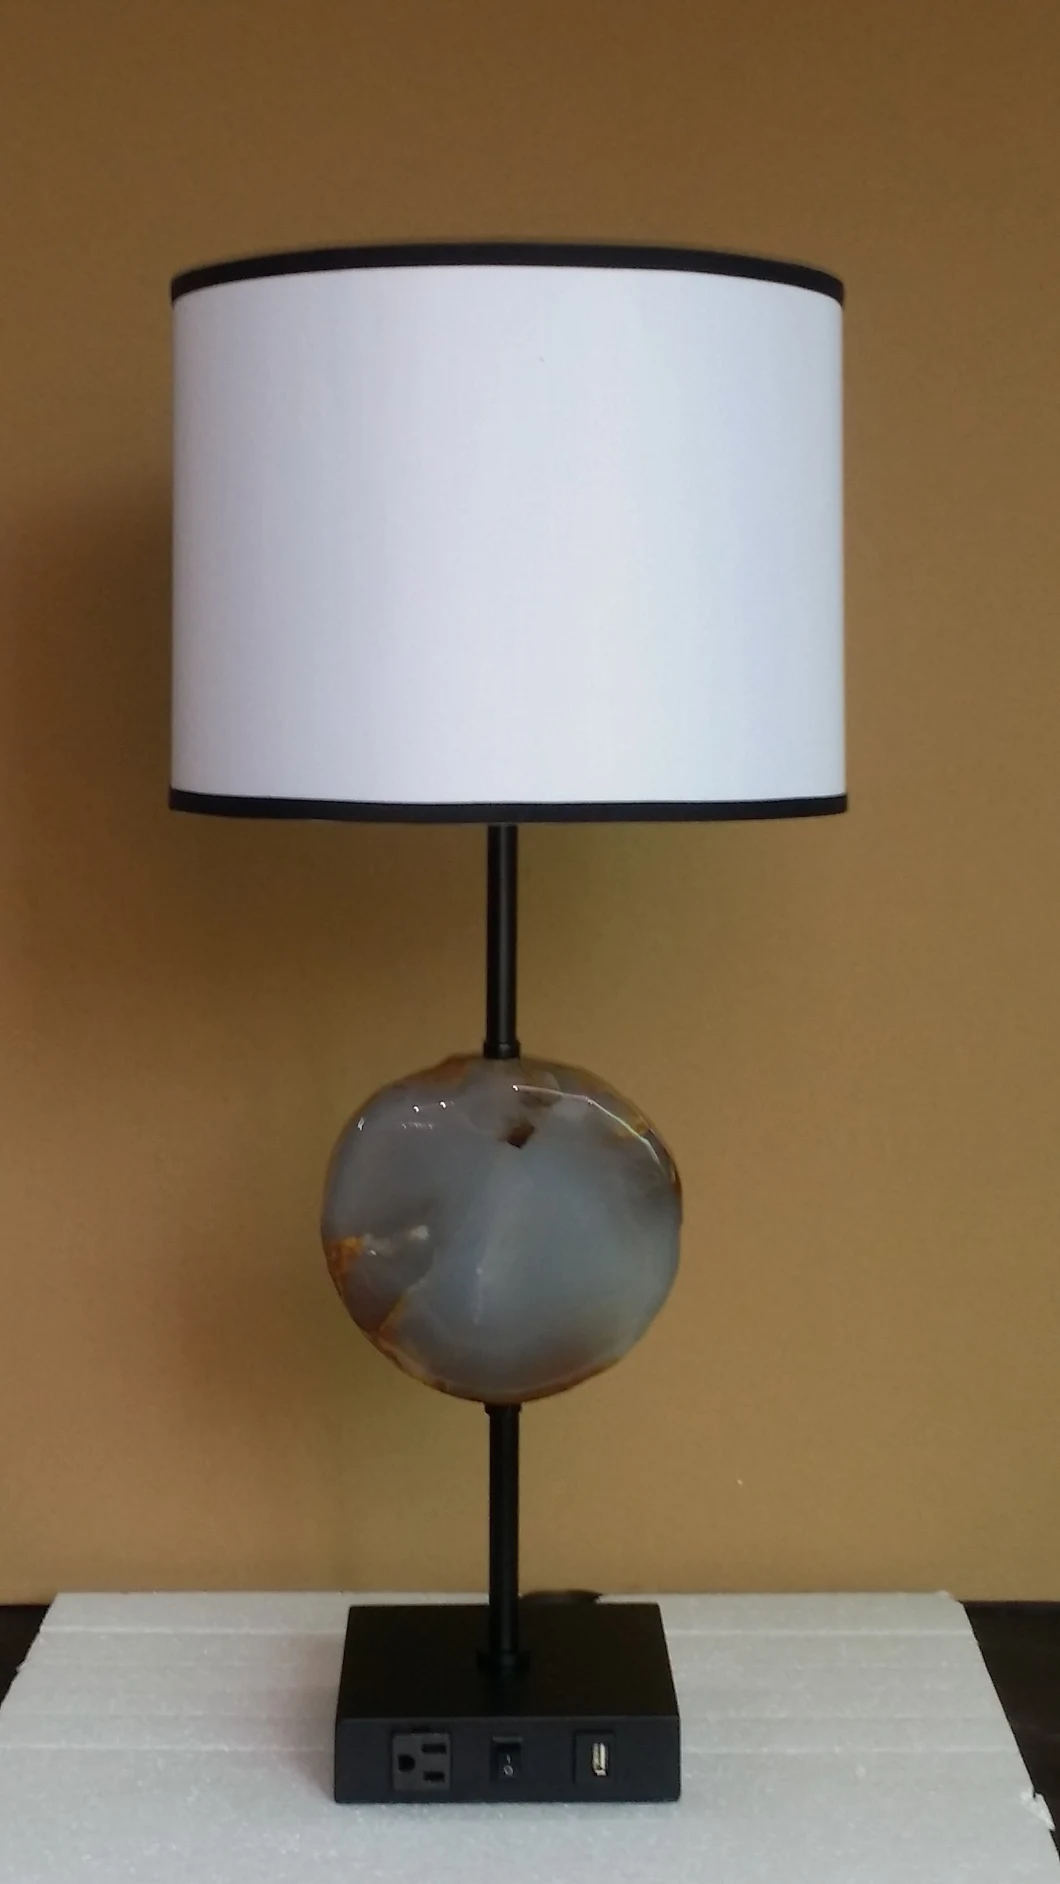 Fabric Shade with Black Fabric Trim and Mica Lamp Body Table Lamp.